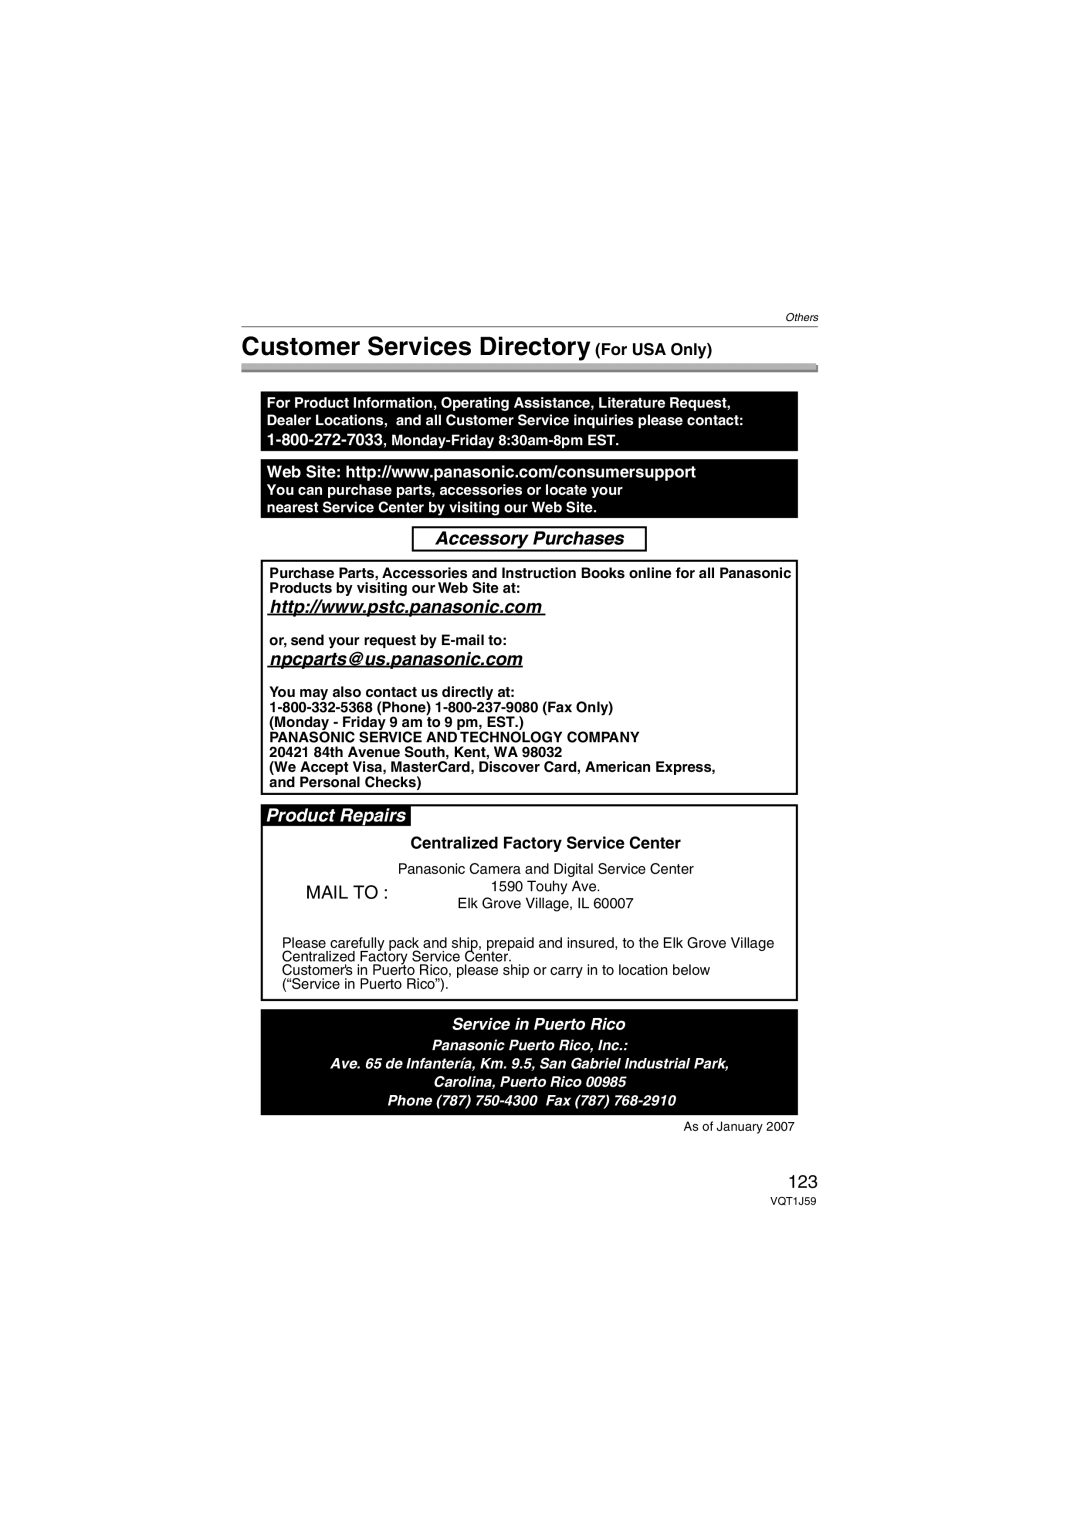 Panasonic DMC-FX55 Customer Services Directory For USA Only, Mail To, Centralized Factory Service Center, Product Repairs 